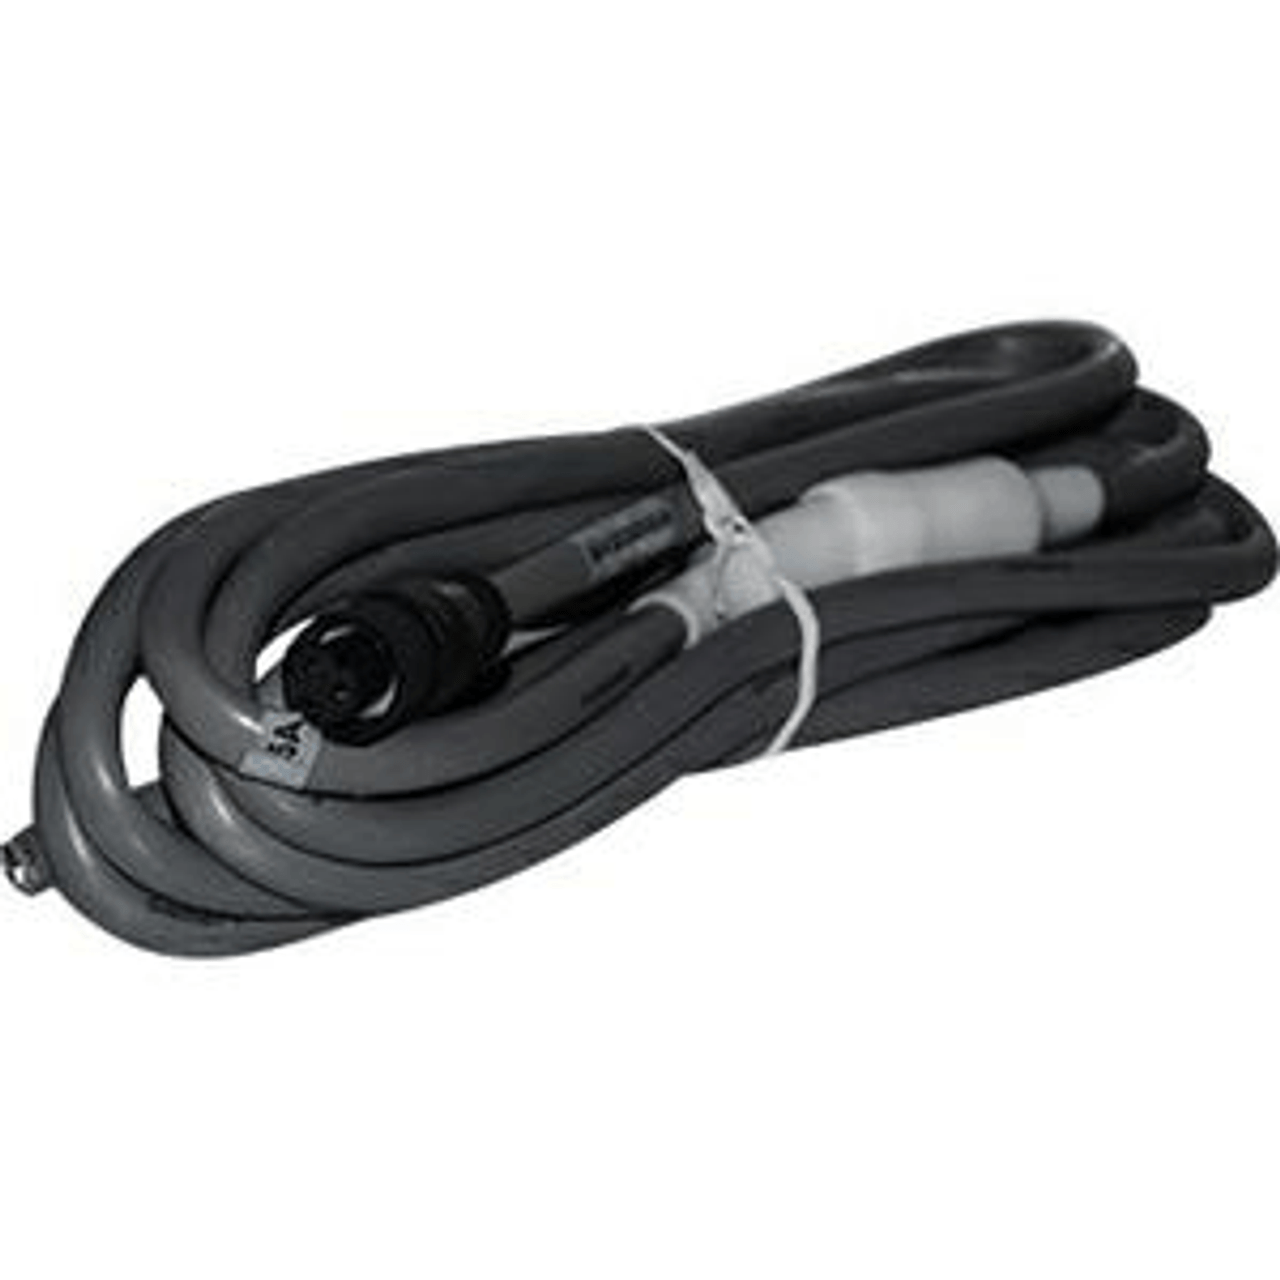 Furuno Power Cable CBC0FS0810 GP-1X71F Best Deal | Blue Bottle Marine